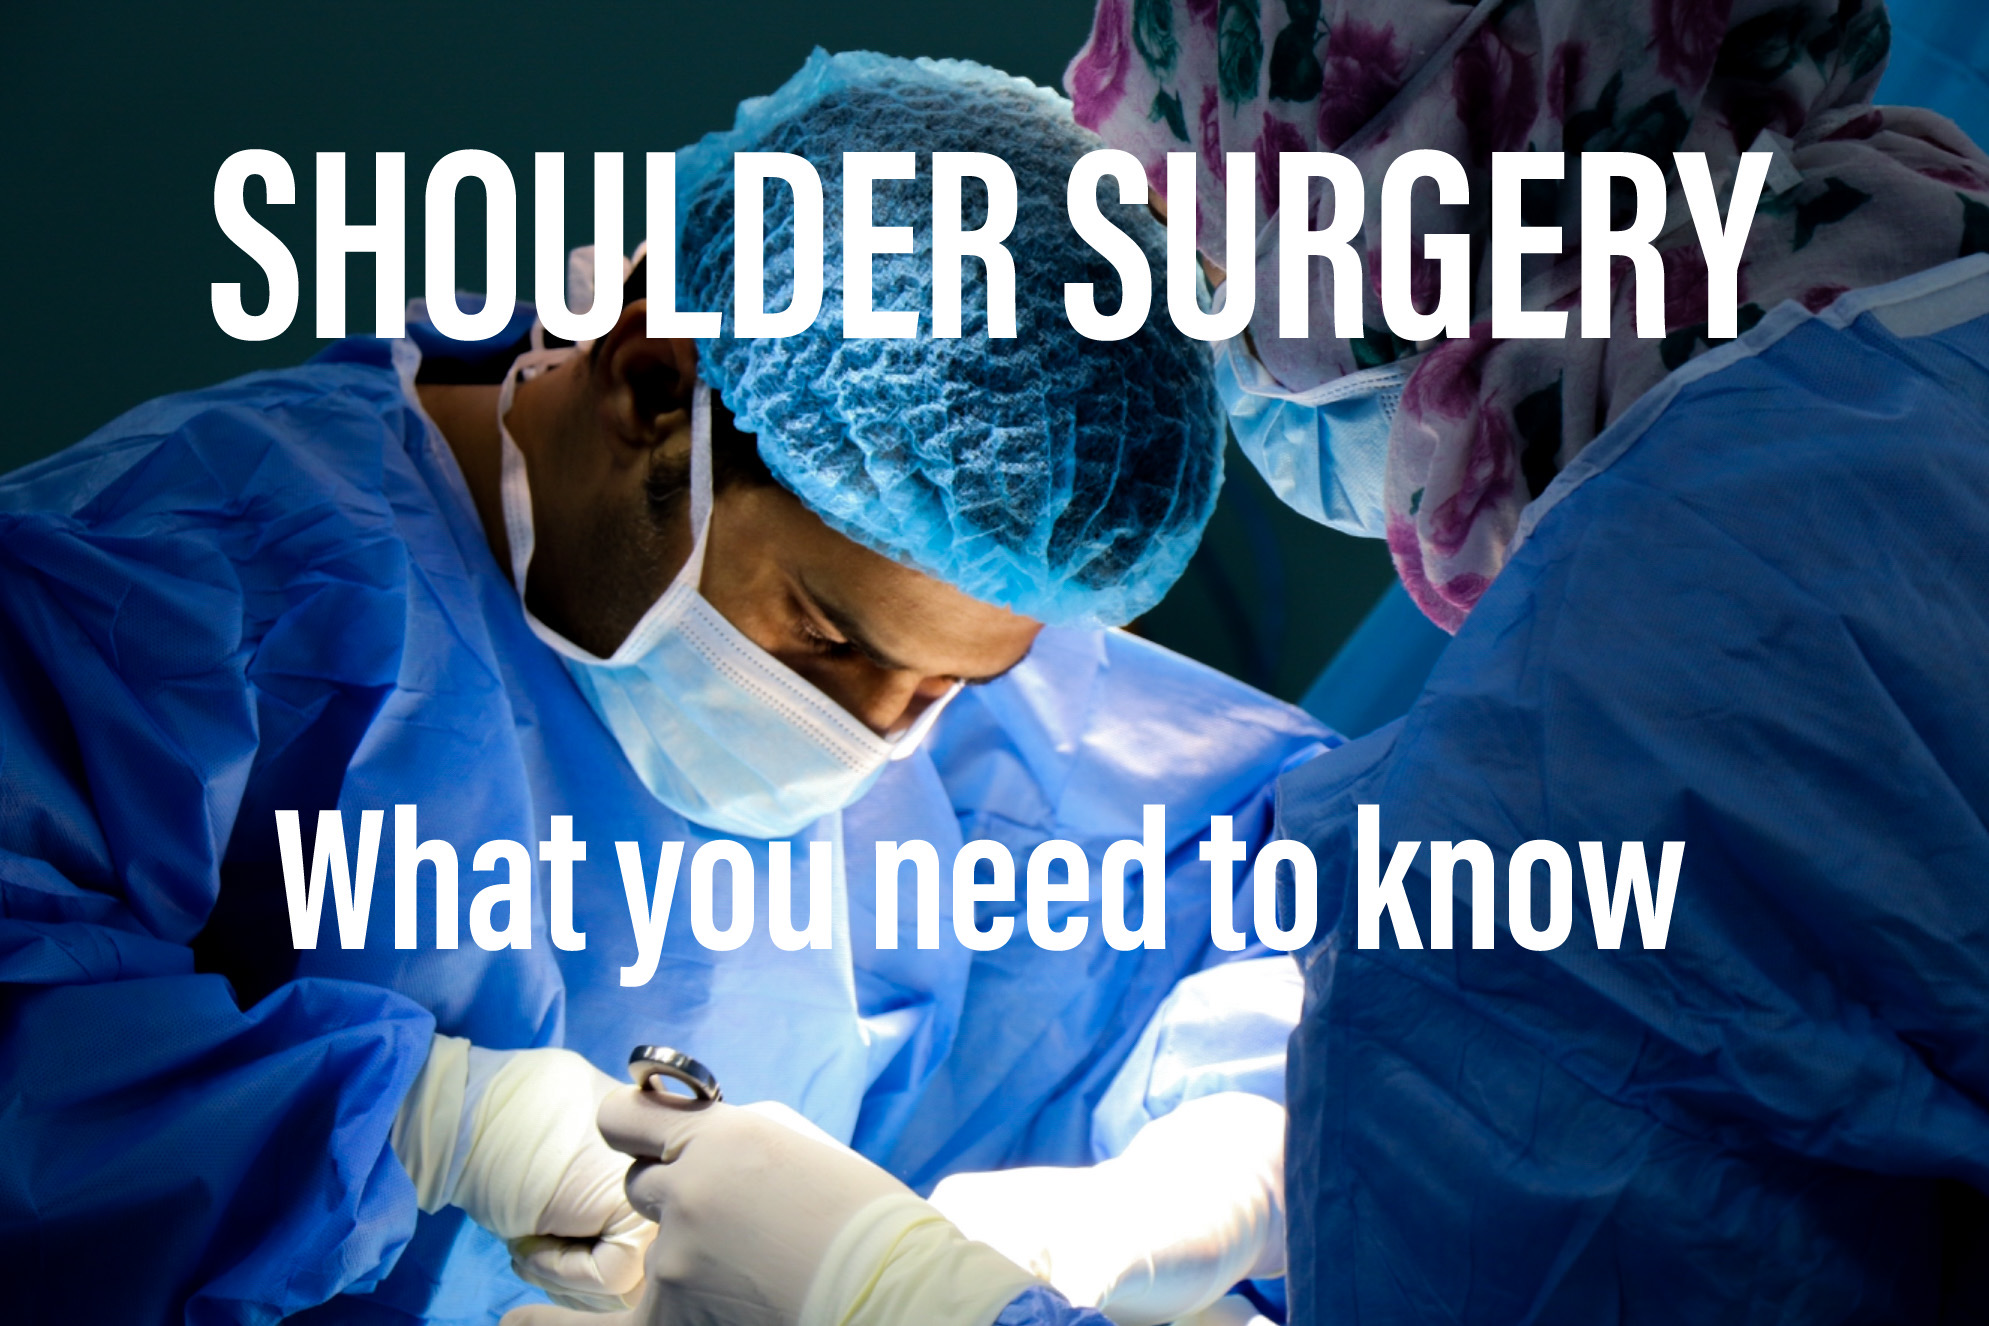 Shoulder Surgery. What you need to know